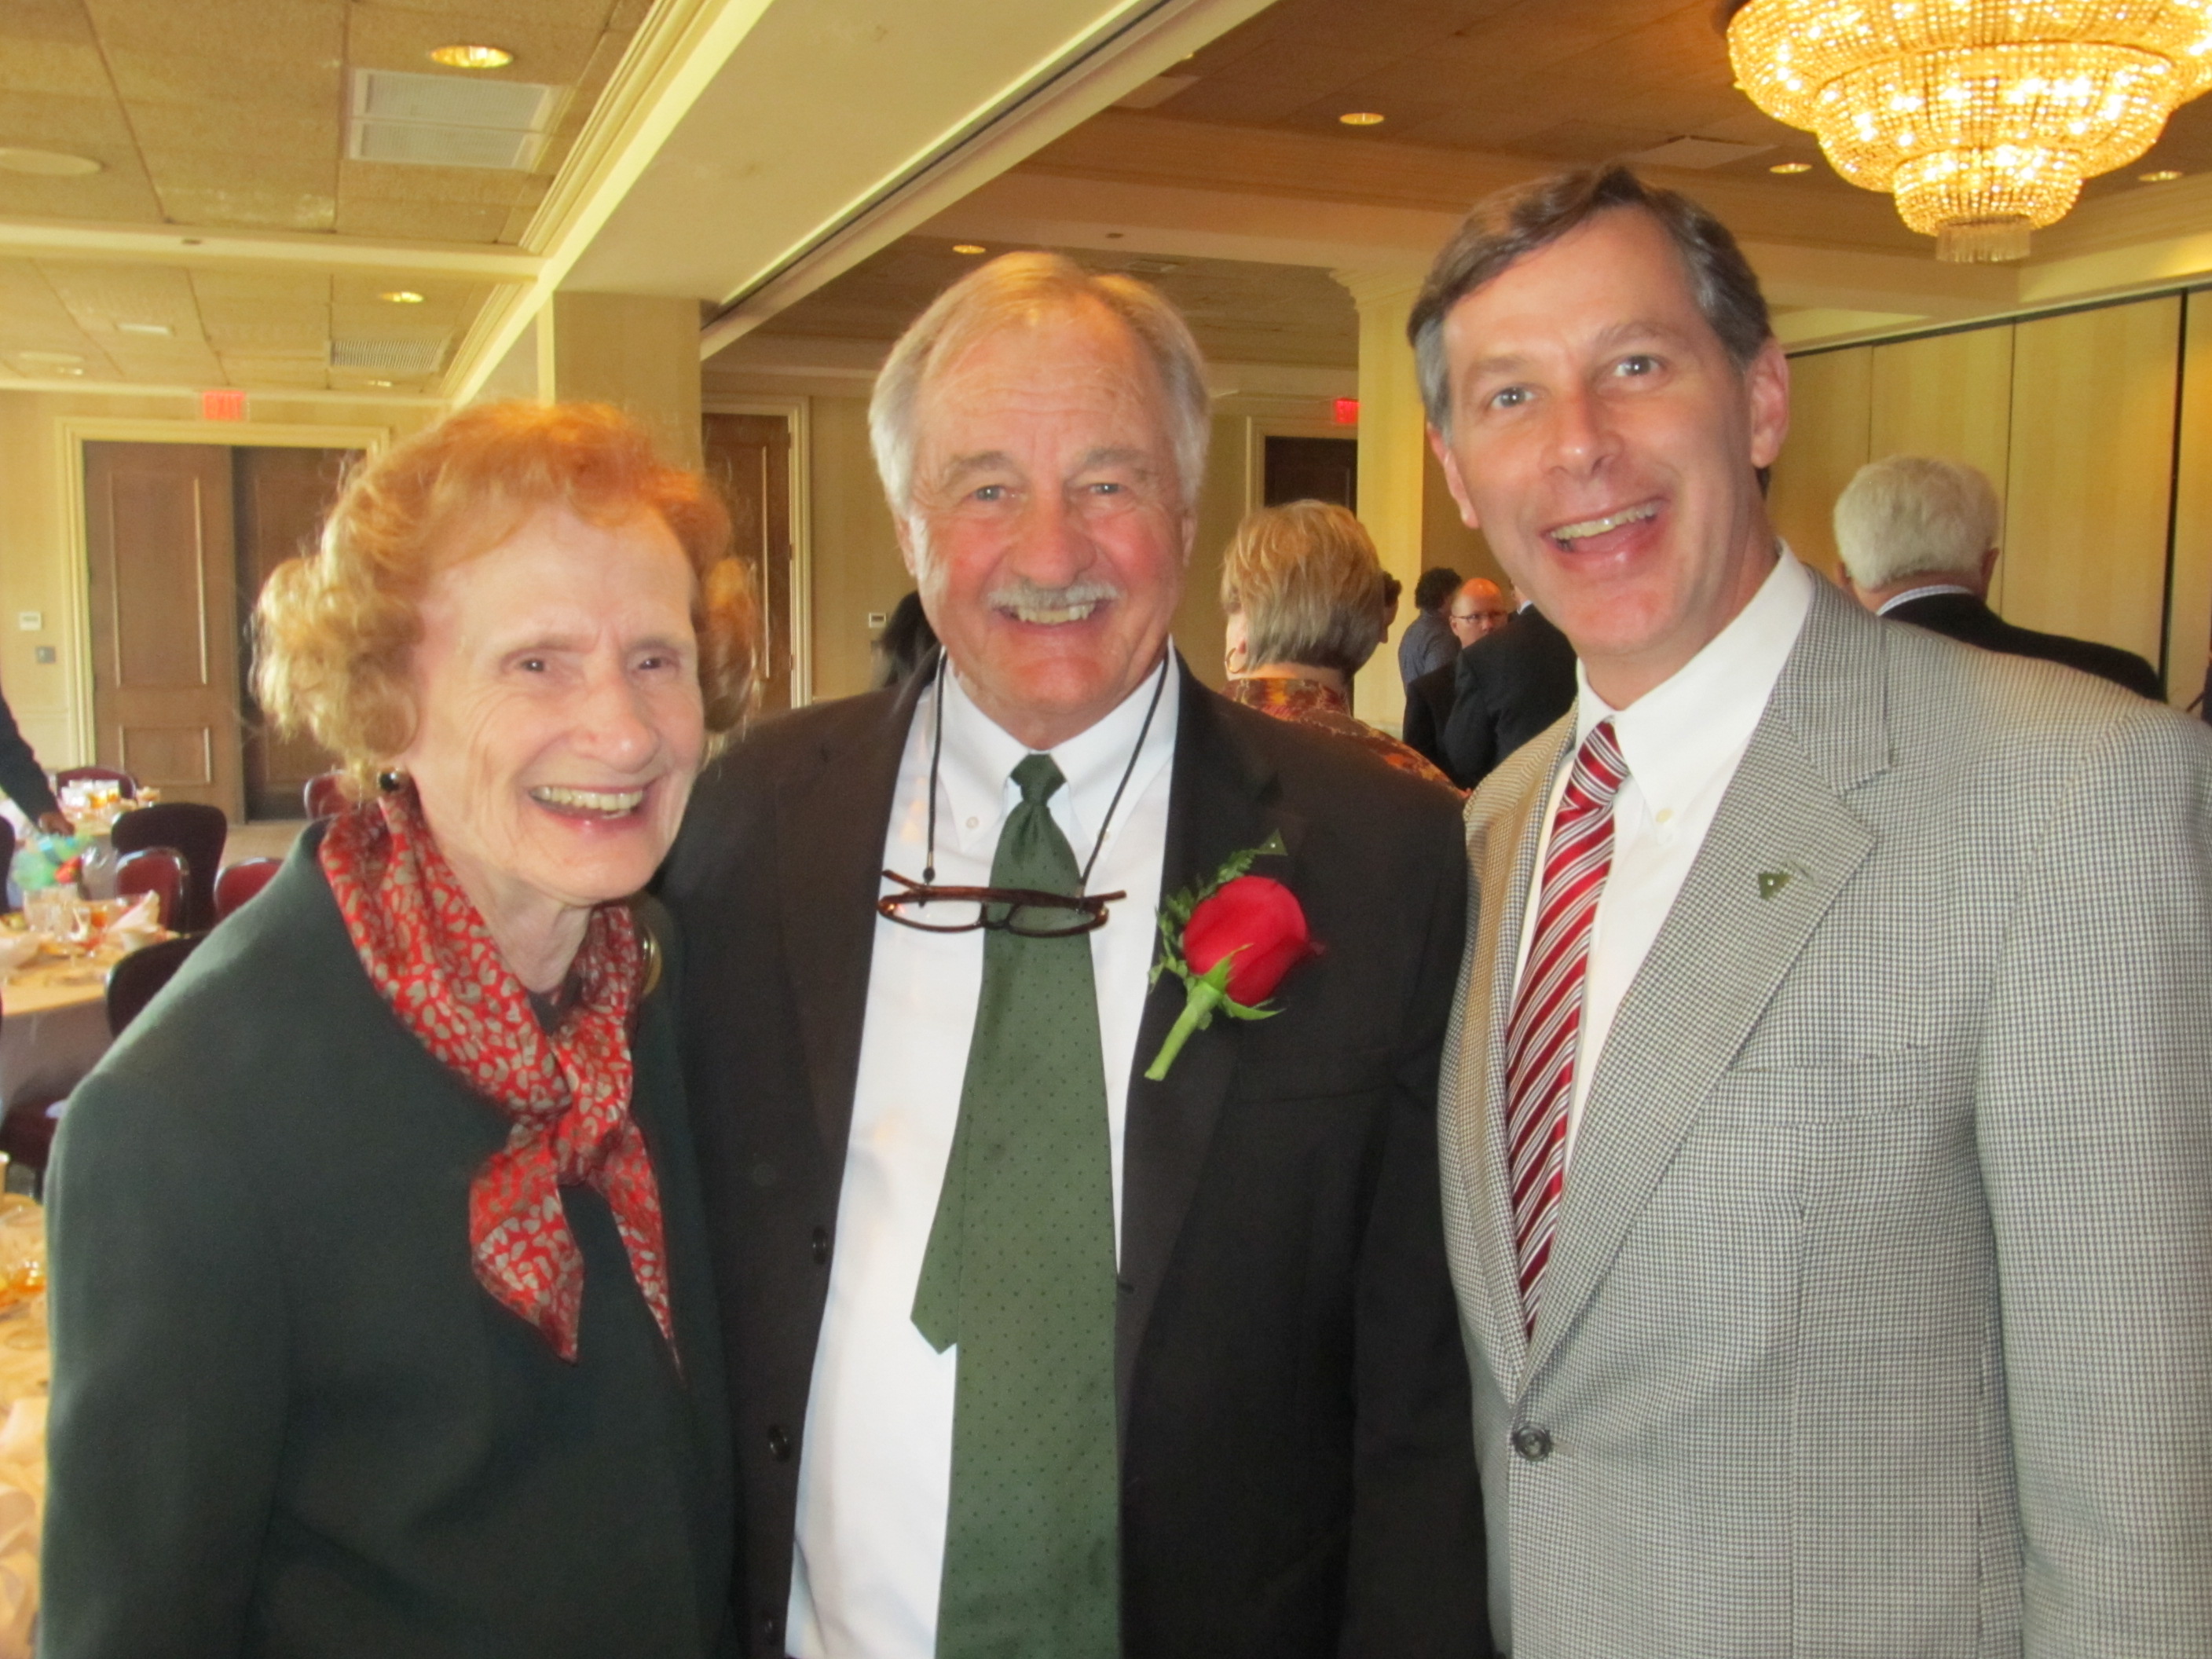 PHOTO:  From left, Delta State University alumni Helen Brock Napier and Dr. Bob Ferguson are congratulated by Executive Director of the Delta State University Alumni-Foundation Keith Fulcher for being honored as “Community Champions” as part of  National Philanthropy Day sponsored by the Association of Fundraising Professionals.